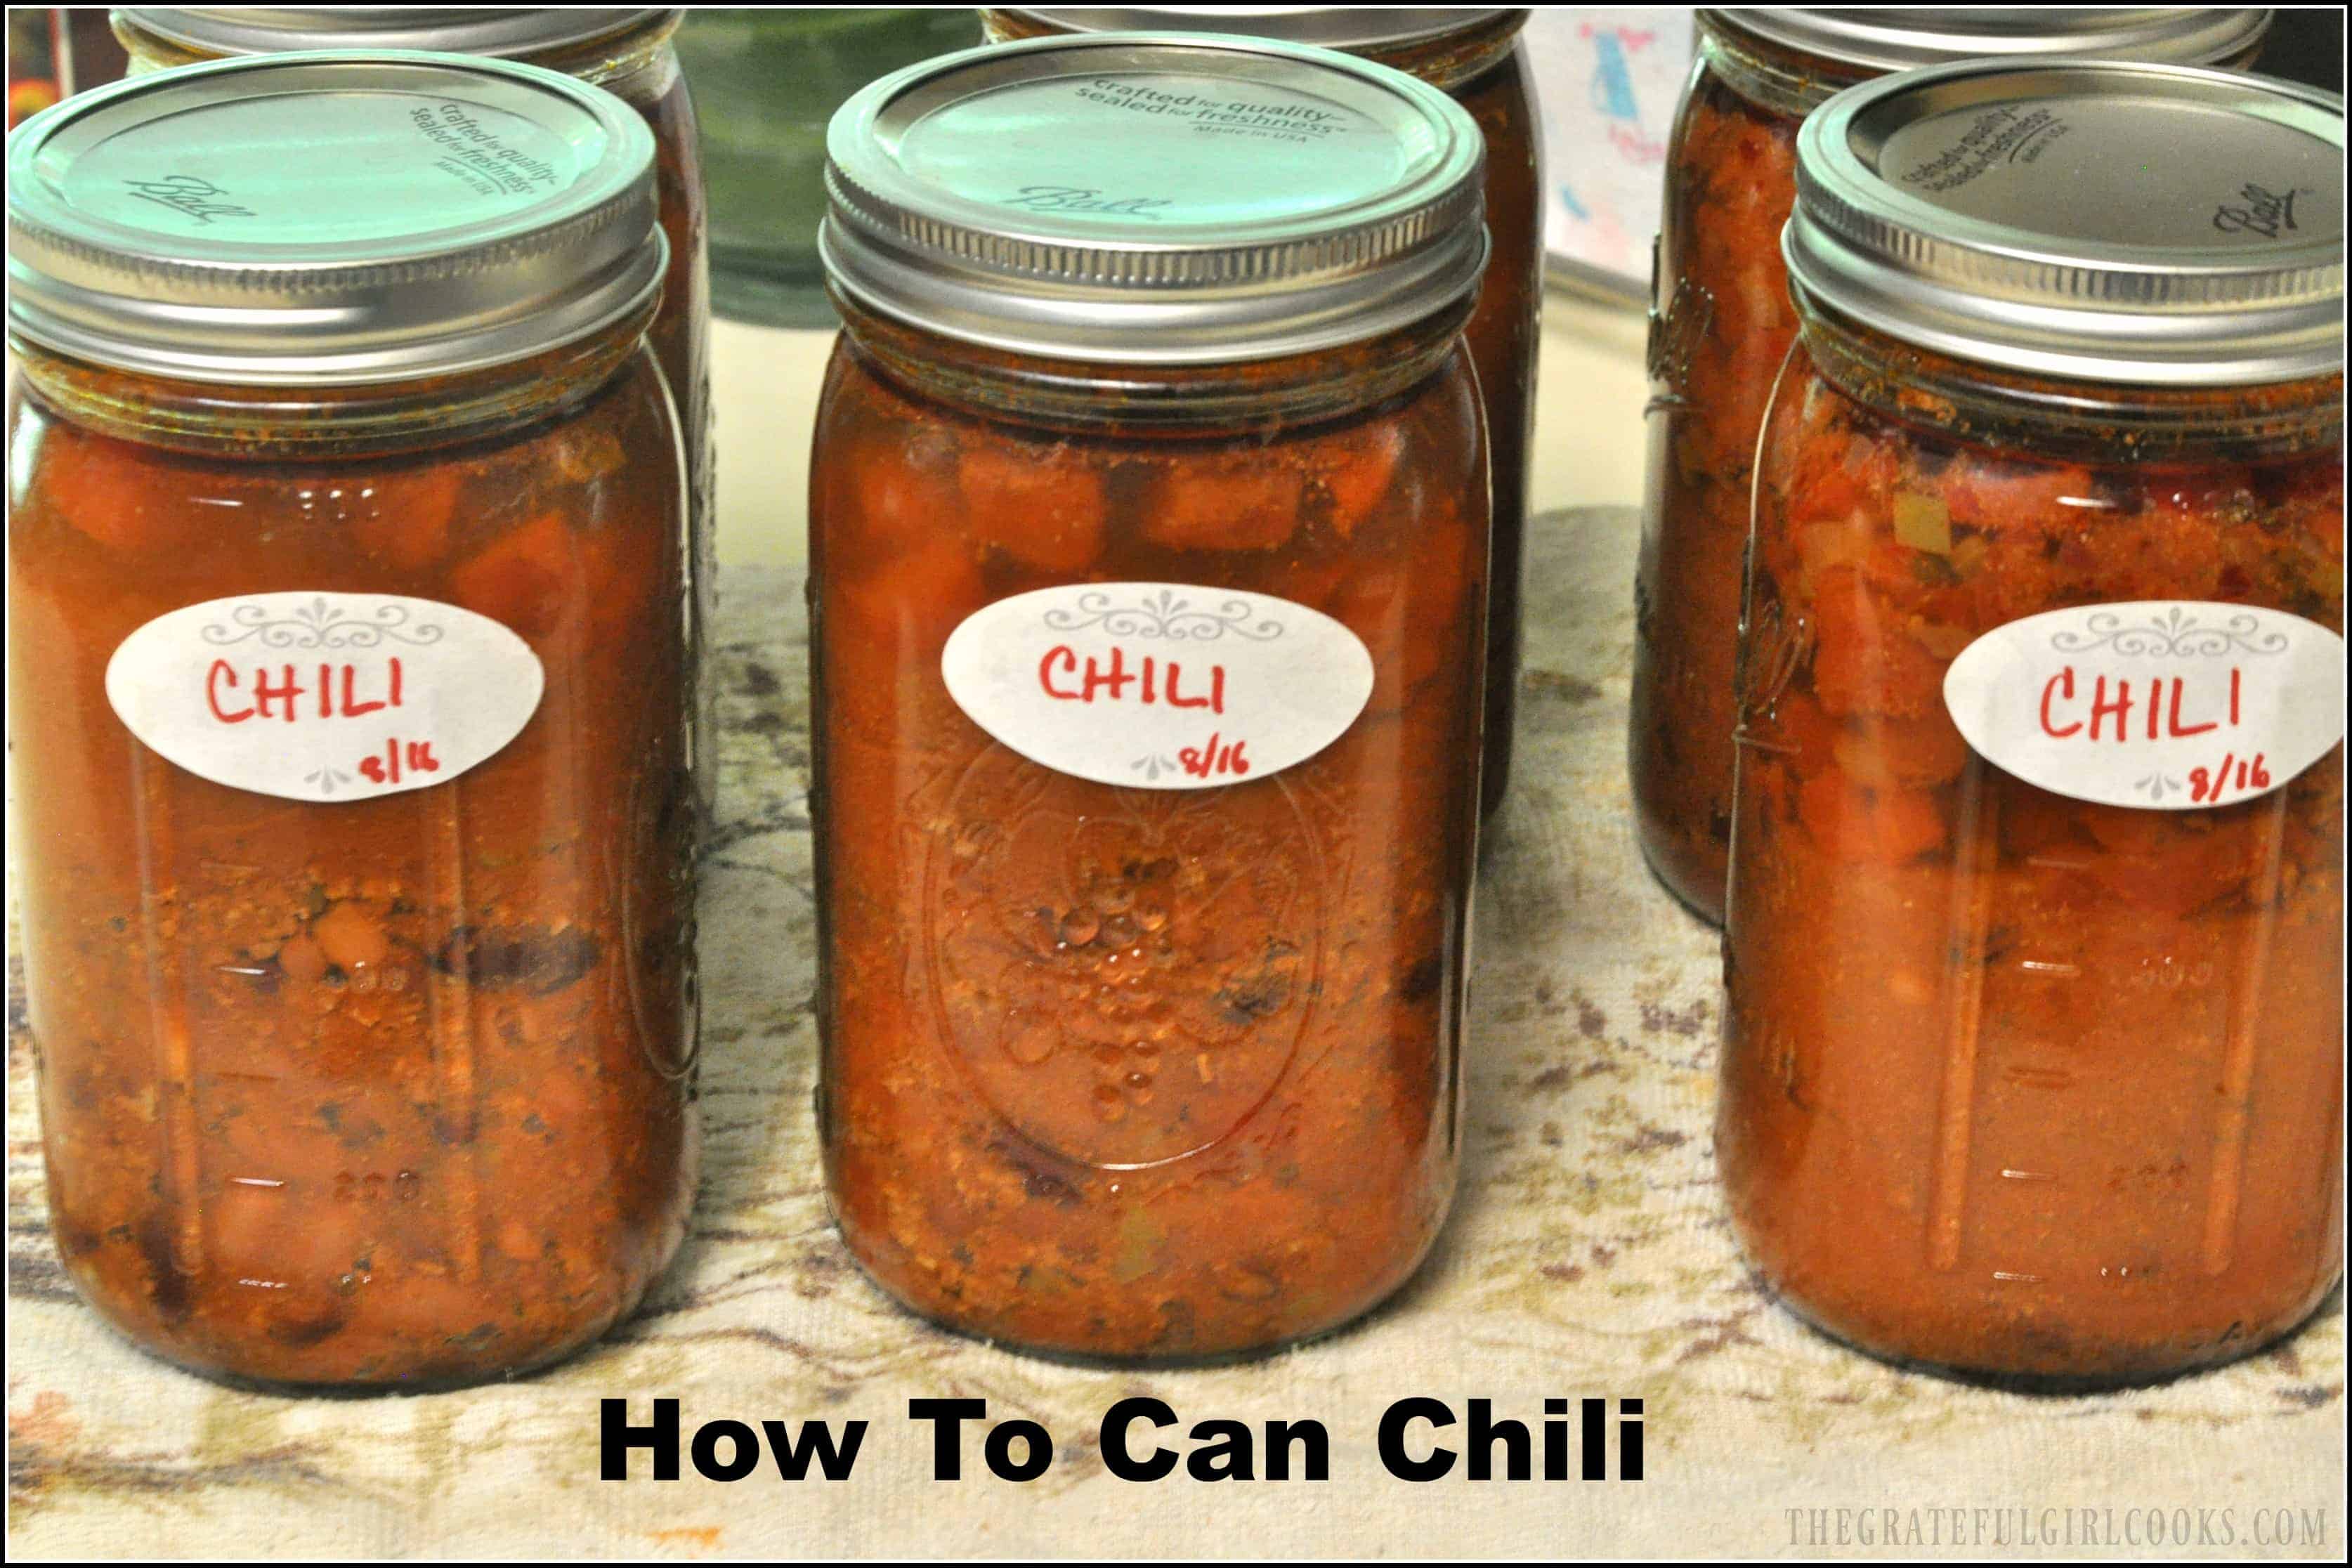 Canning Chili in Presto 12 Quart Electric Canner - A Quick and